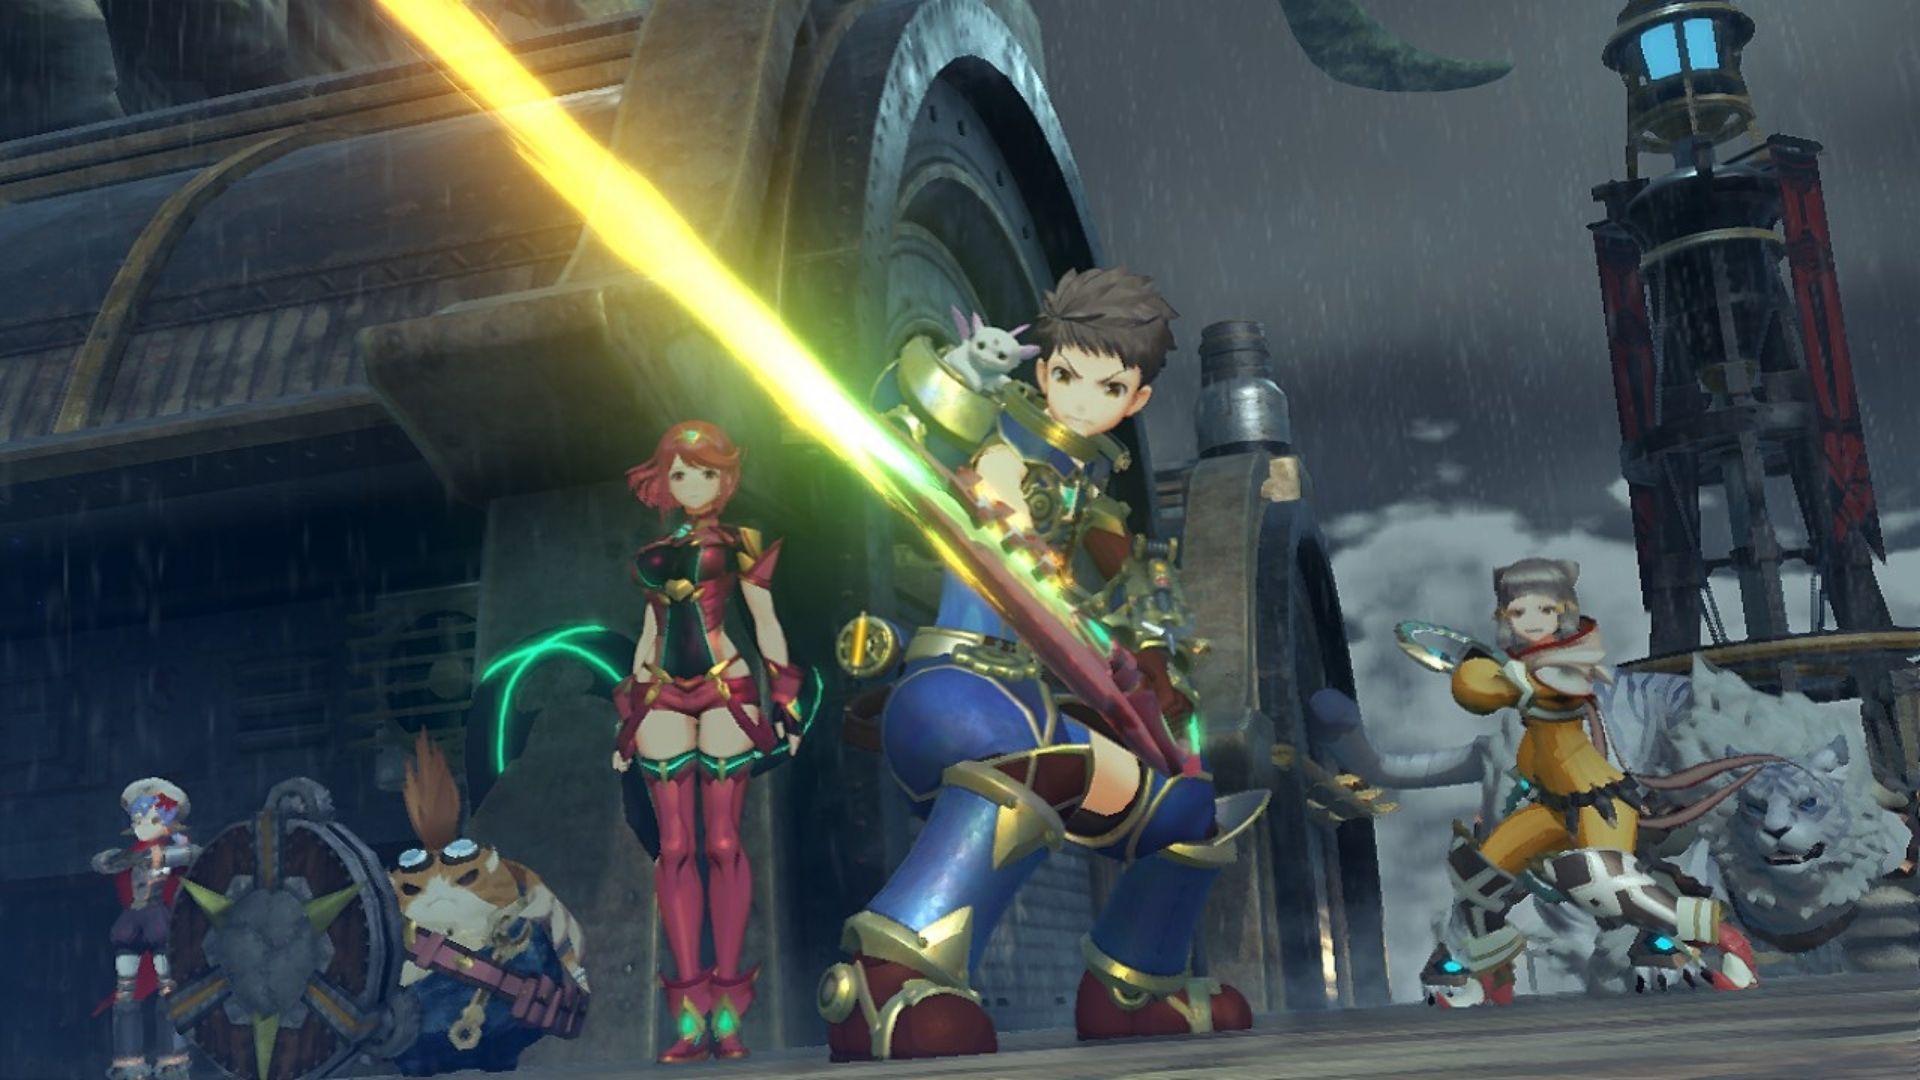 A screenshot from Xenoblade Chronicles 2, a game like Pokémon, showing Rex holding his sword, defending Pyra, Mia, and his other friends.